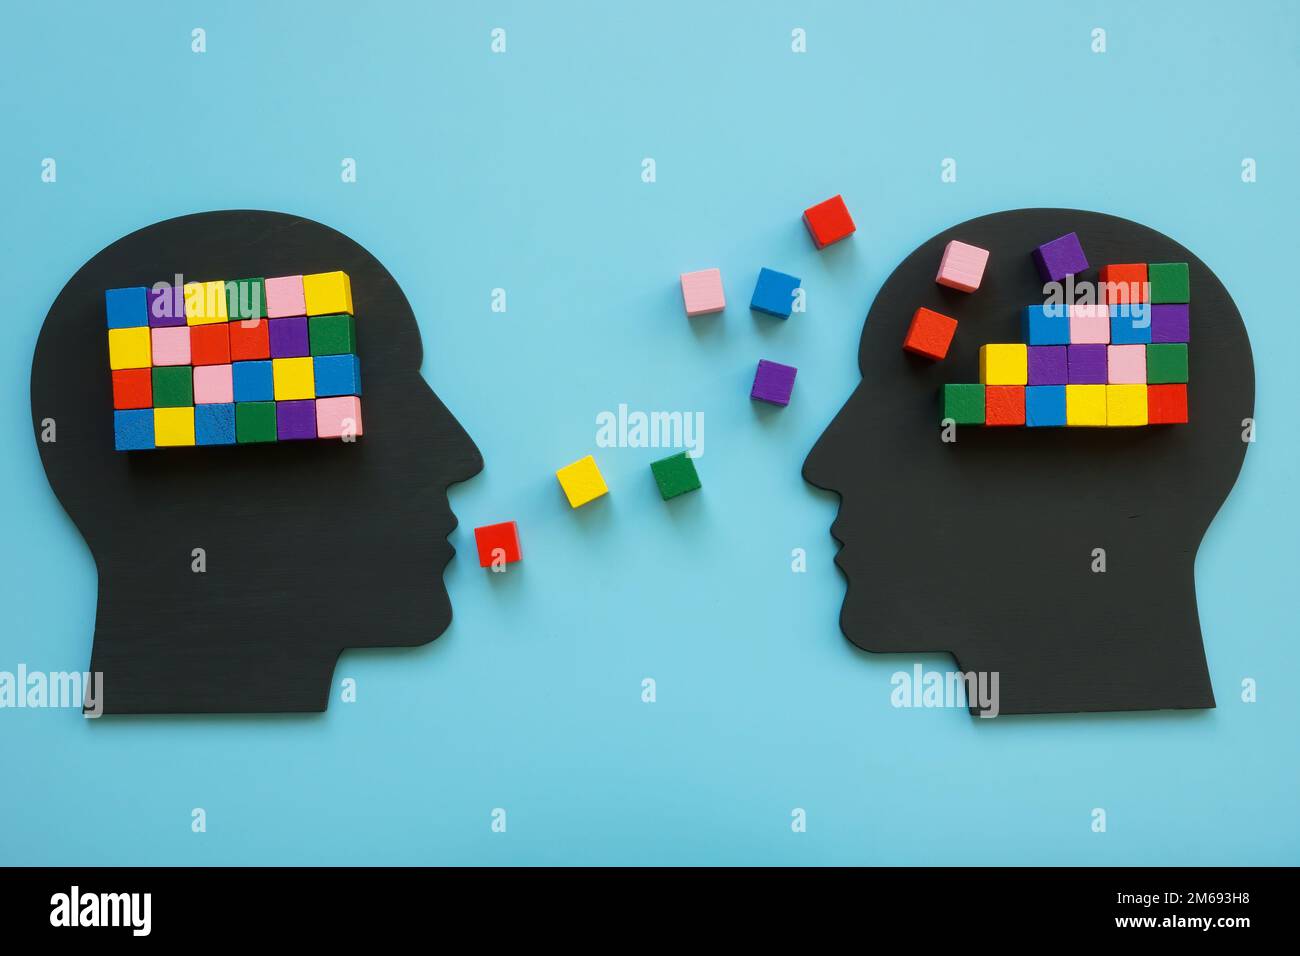 Heads with colorful cubes as symbol of mentoring and psychotherapy. Stock Photo